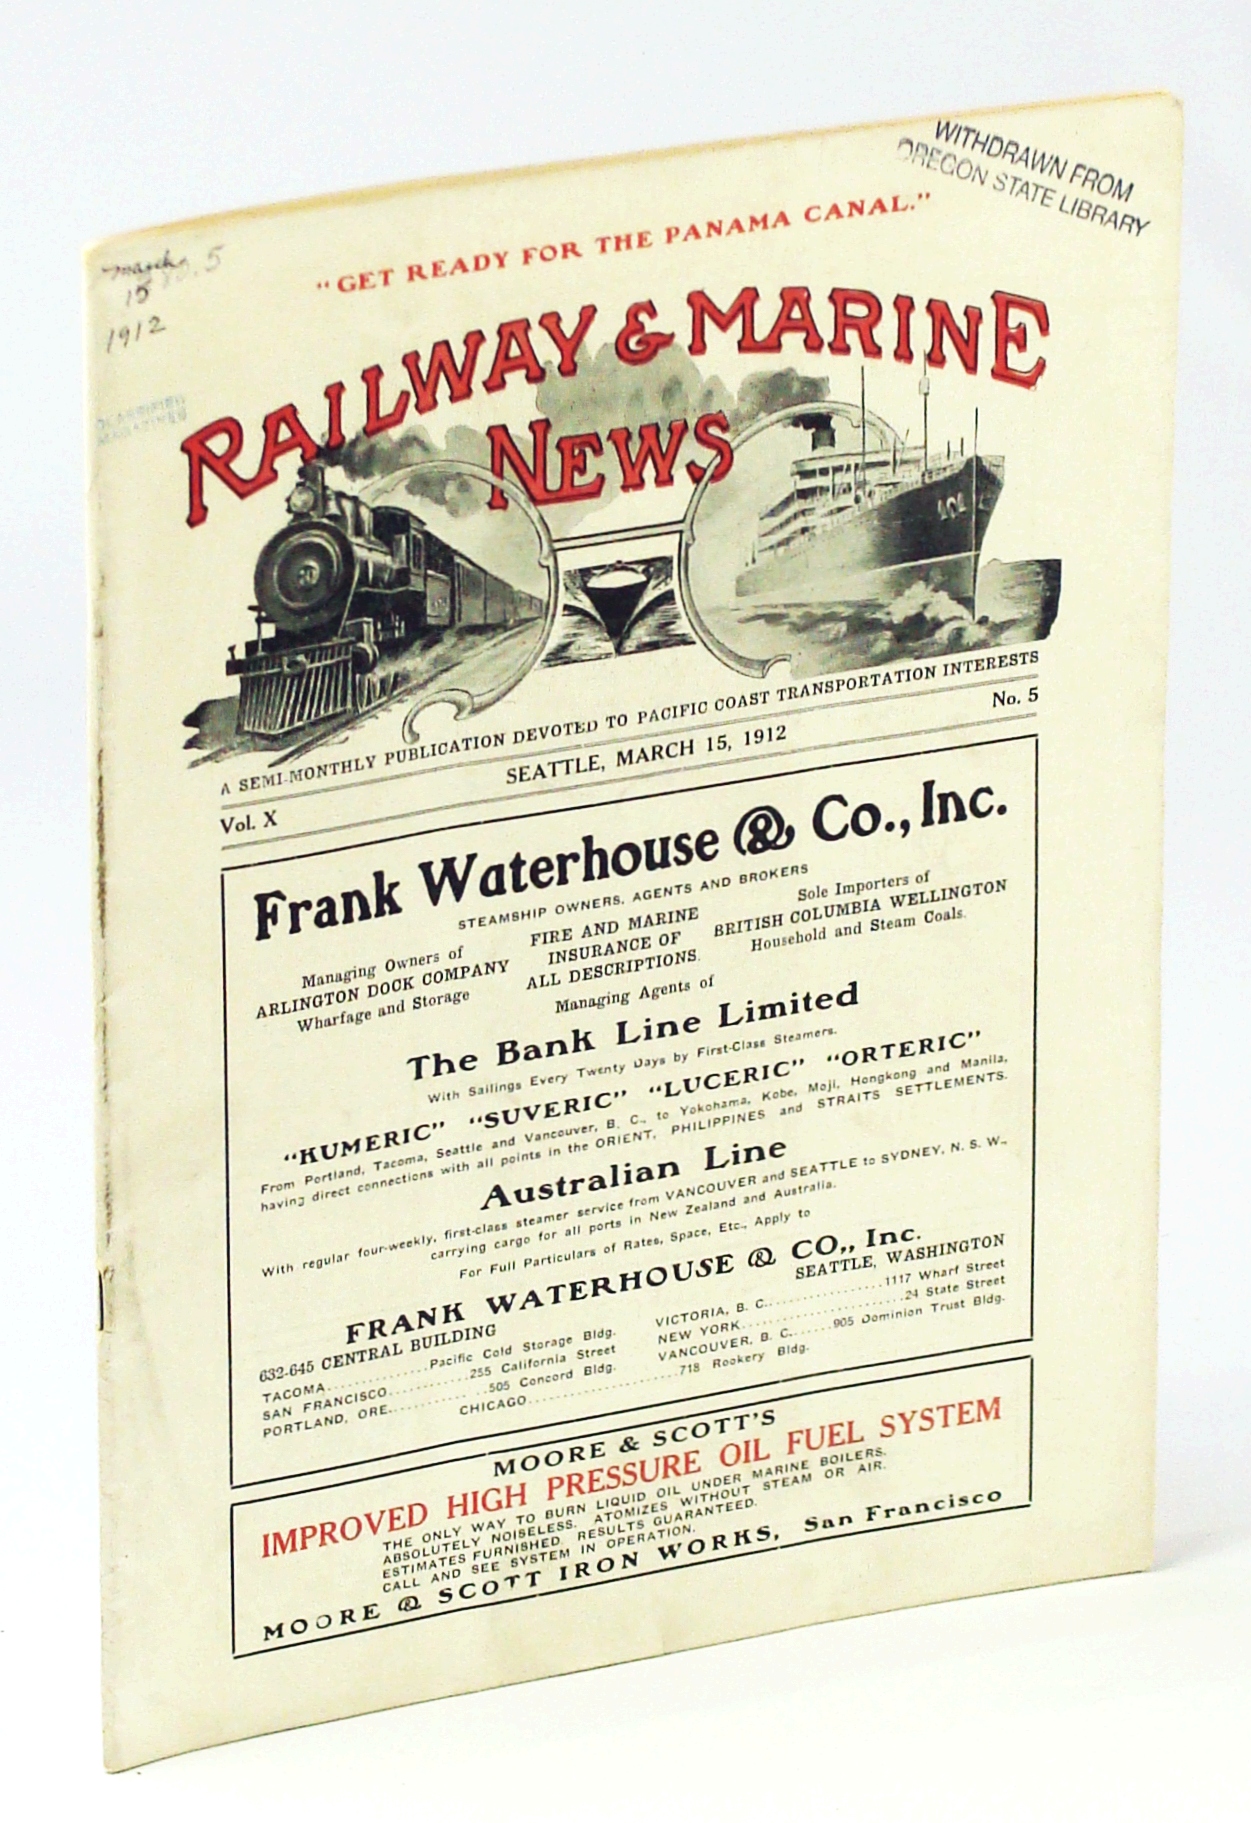 WHITHAM, PAUL P. - Railway & Marine News, a Semi-Monthly Publication Devoted to Pacific Coast Transportation Interests, March 15, 1912, Vol. X, No. 5 - Grand Trunk Pacific Completes Fine Dock at Vancouver